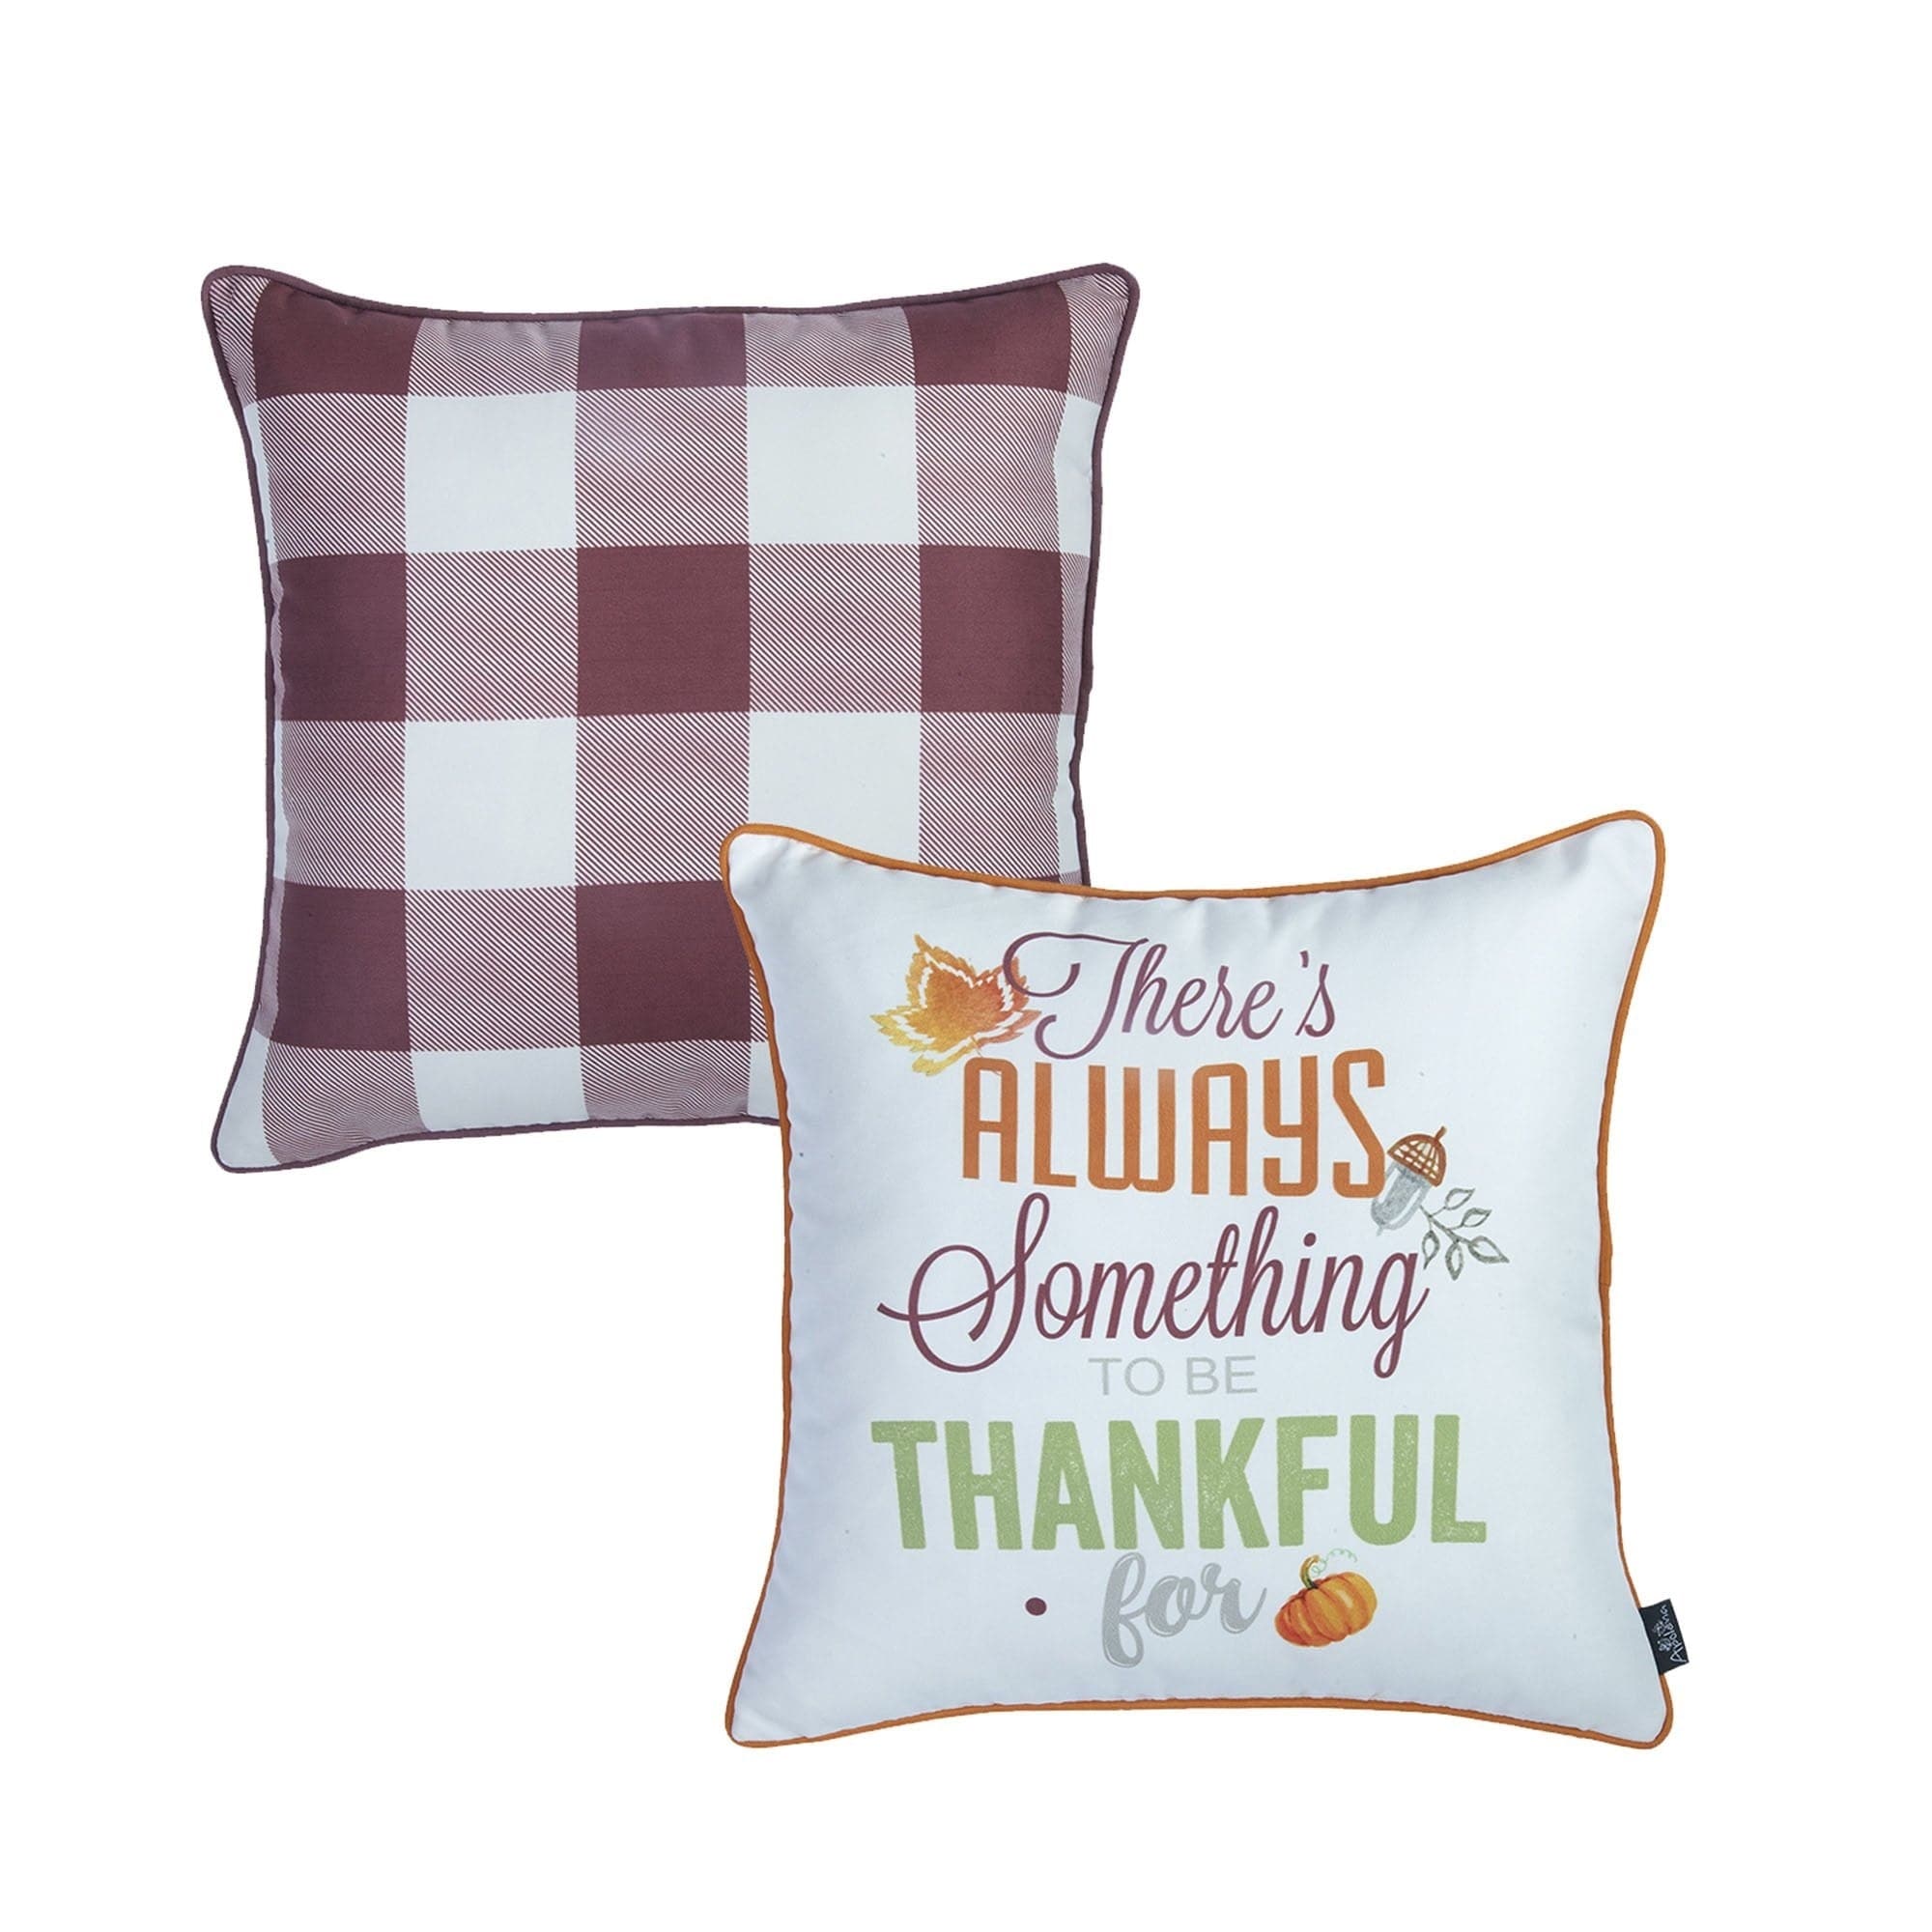 https://ak1.ostkcdn.com/images/products/is/images/direct/57e80a72391d6285643dcc3d1ddd80e35aa4a57d/Decorative-Fall-Thanksgiving-Throw-Pillow-Cover-Plaid-%26-Quote-Set-of-2.jpg